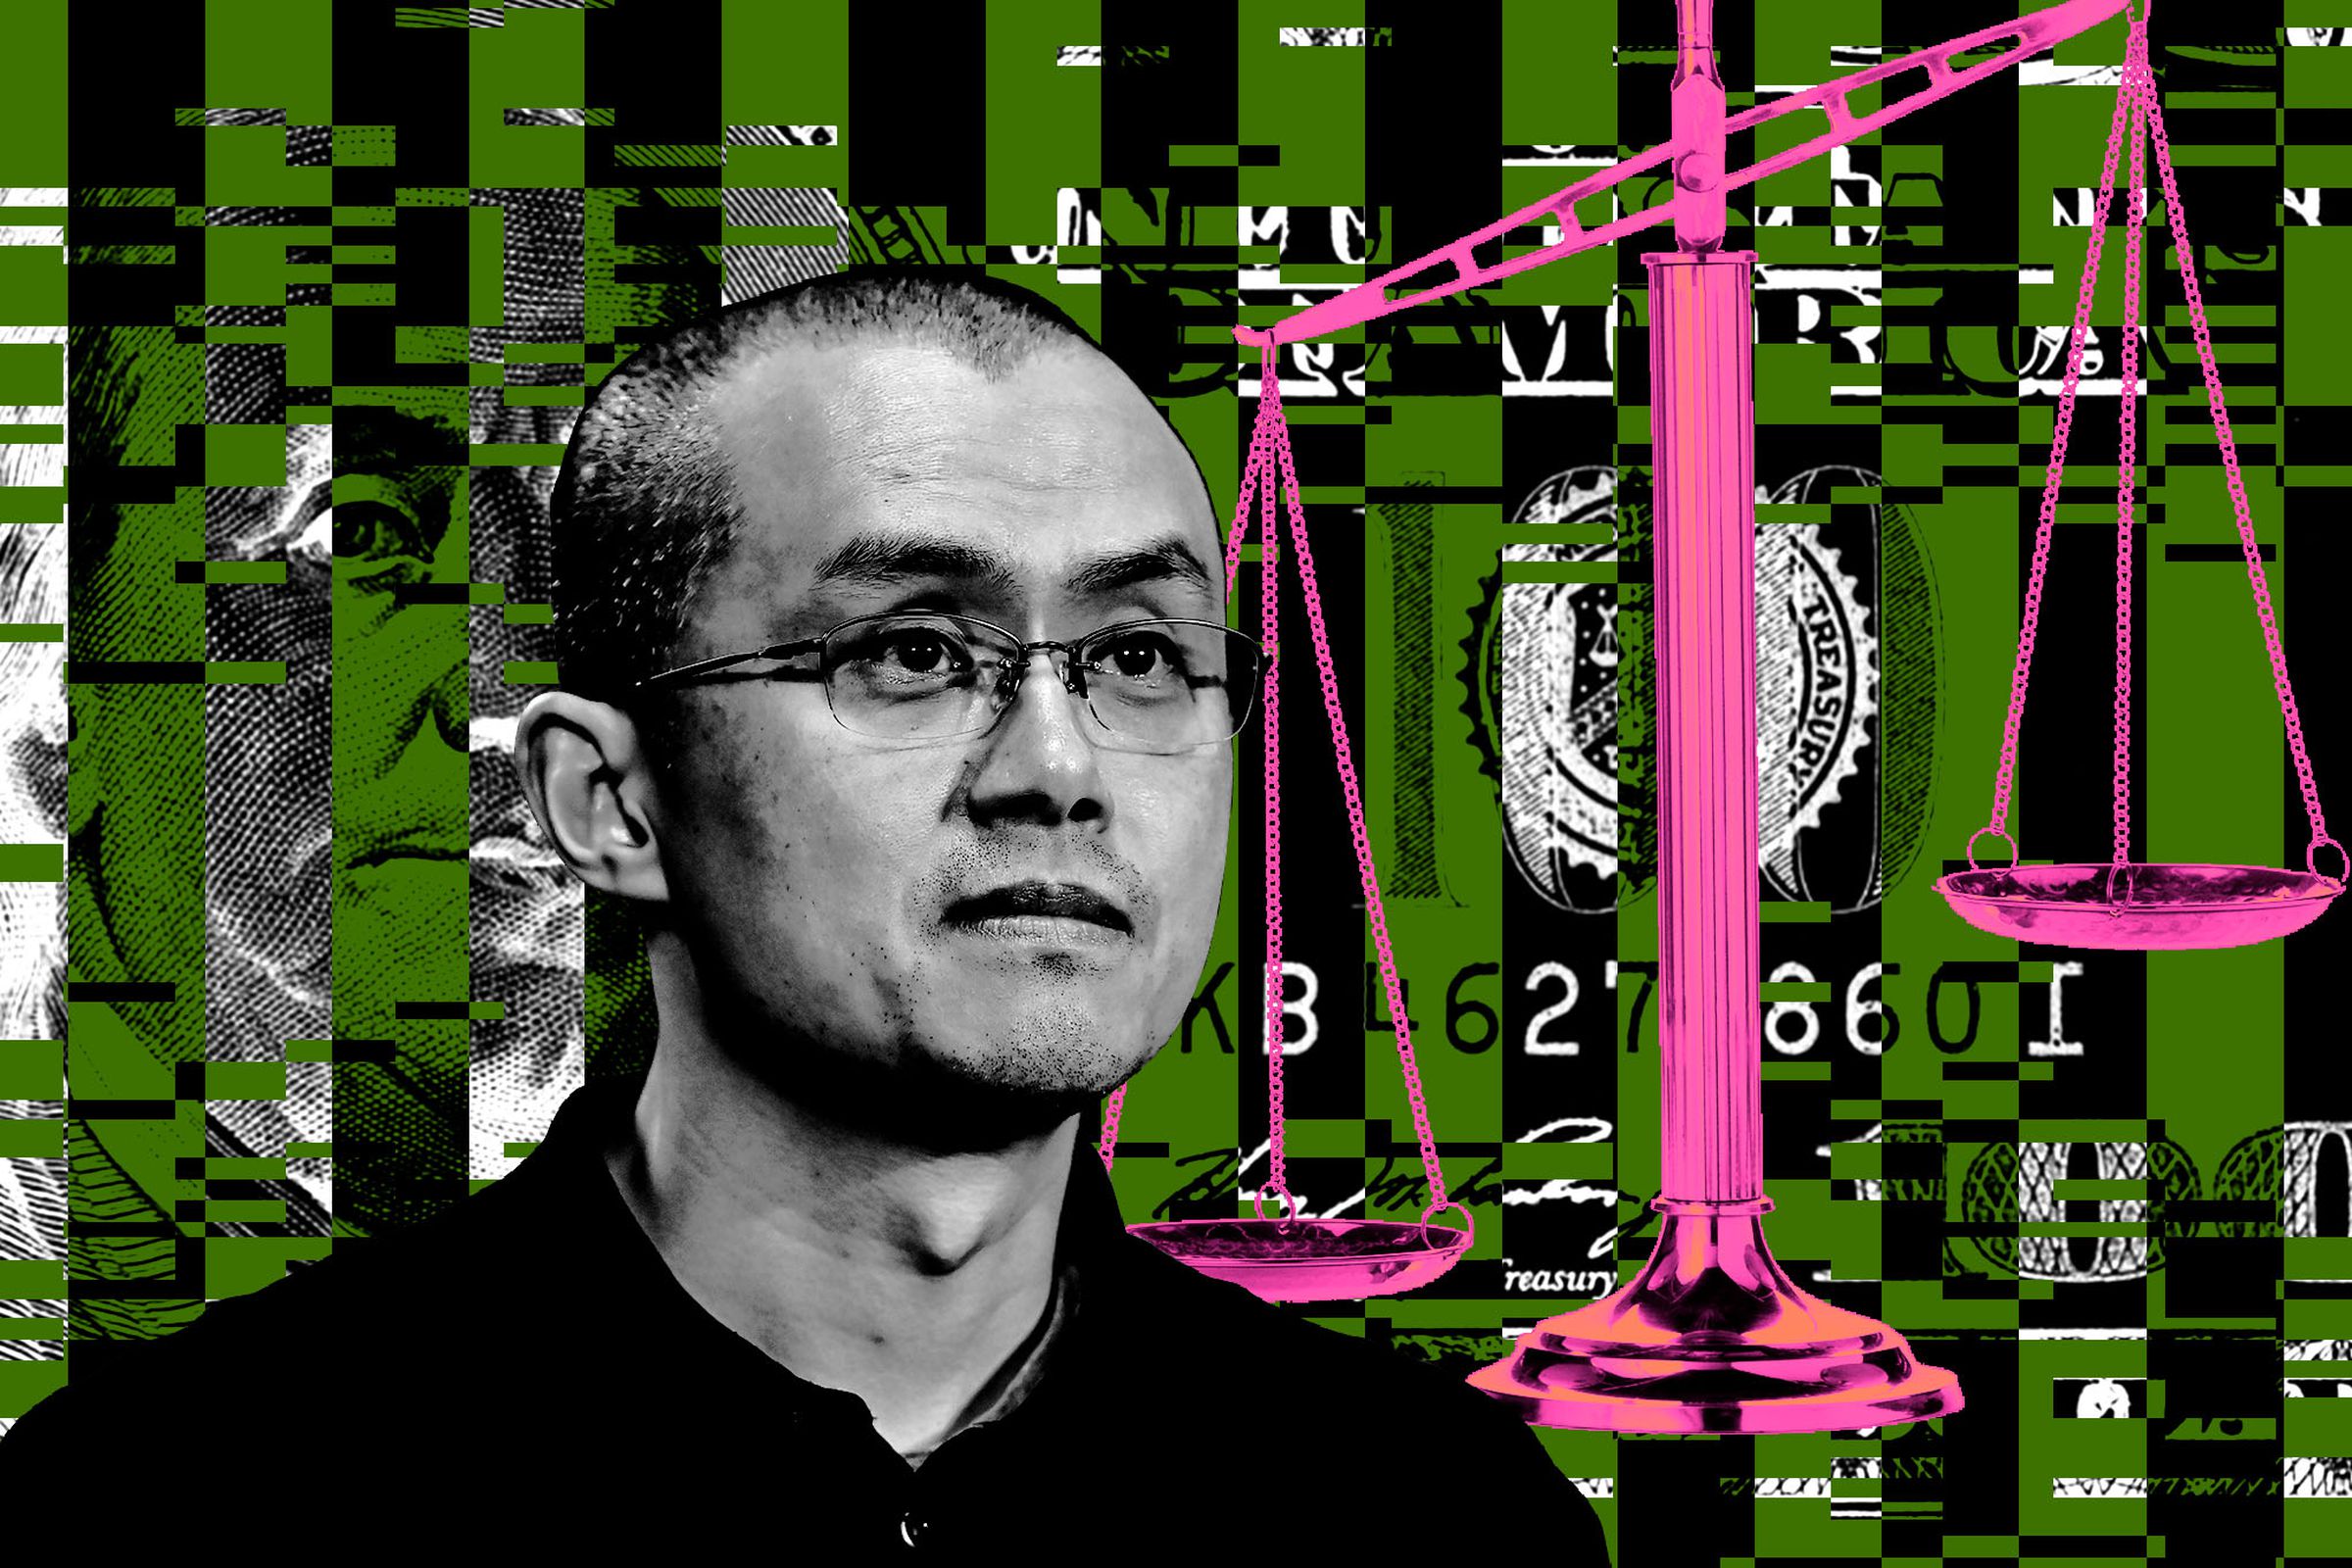 Photo collage of Changpeng Zhao in front of a background of black stripes, justice scales, and pixelated money.